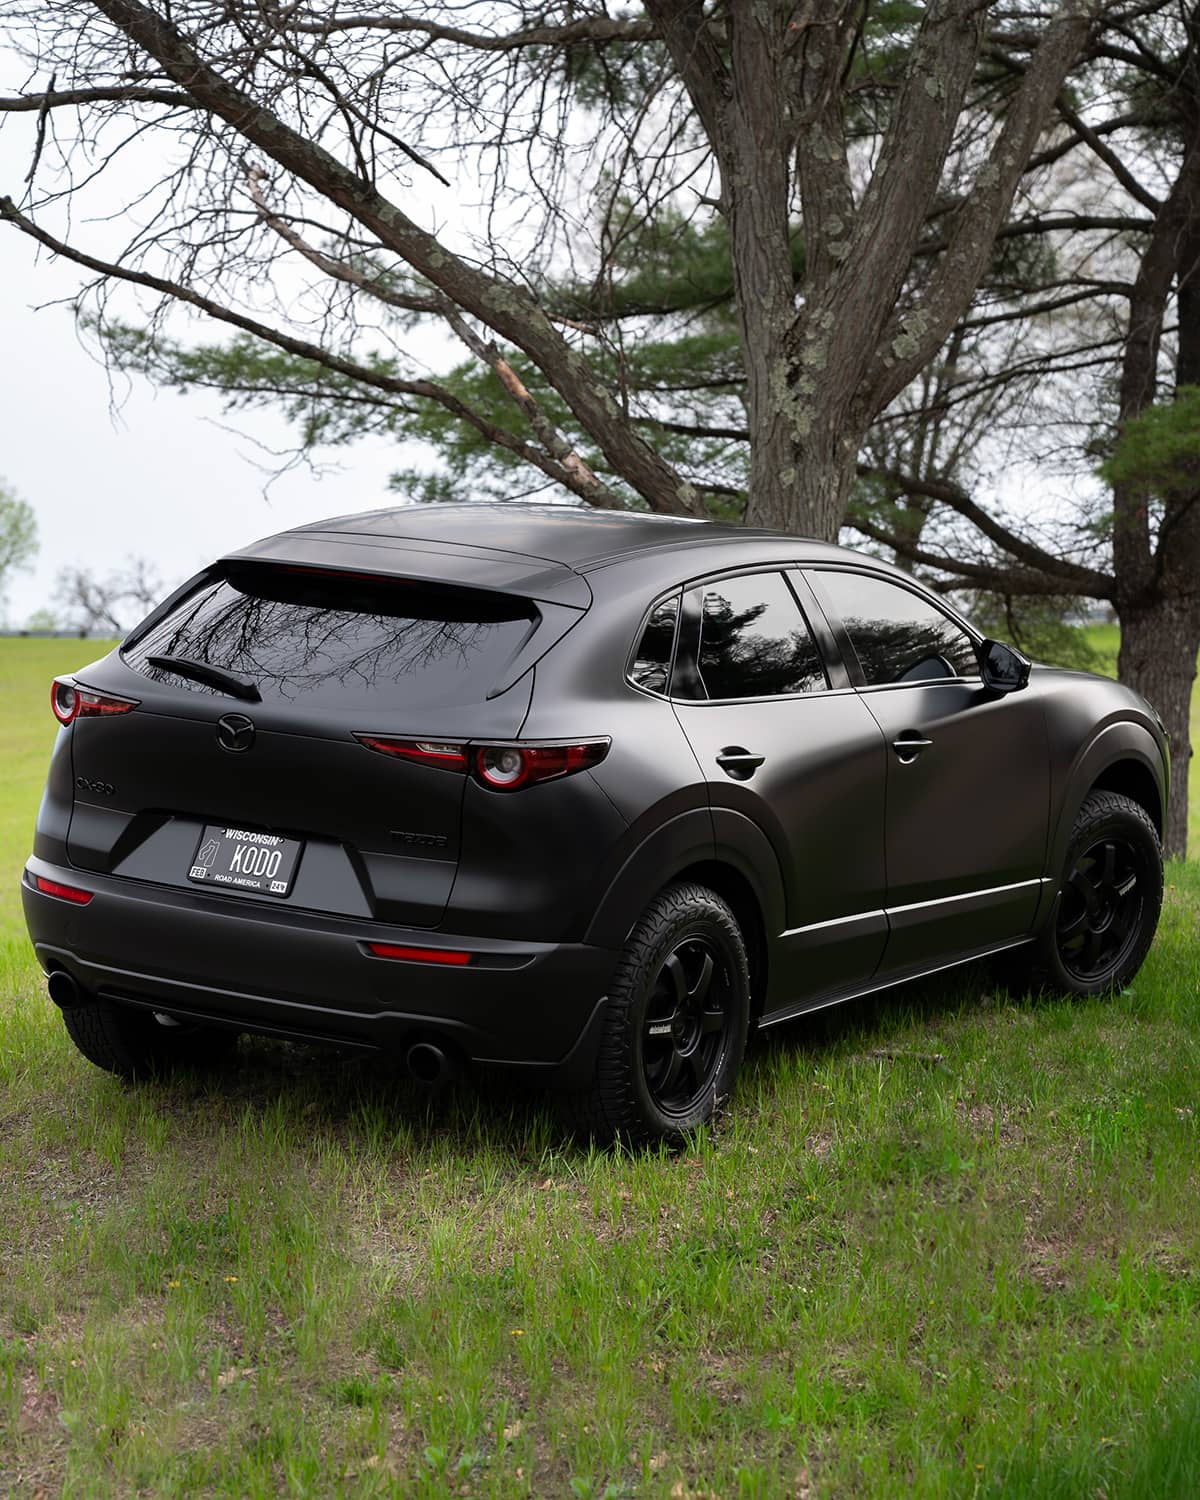 Matte Black Mazda CX30 with Roof Rack delete and black tires